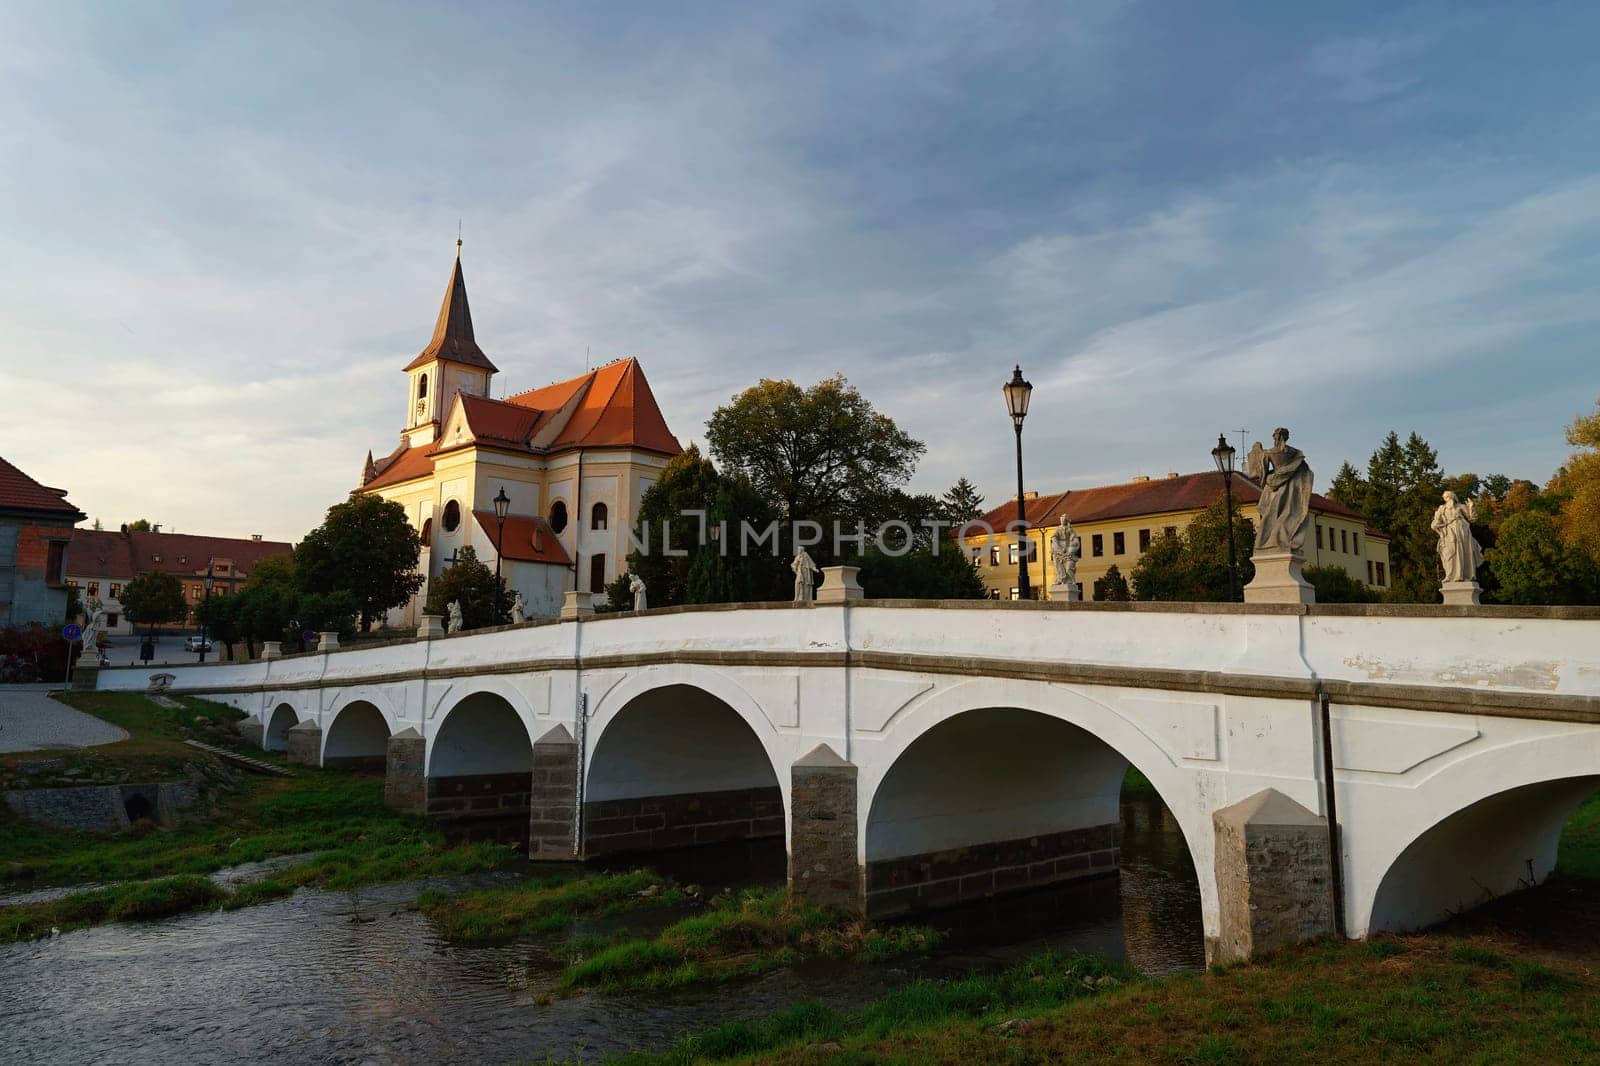 Beautiful old castle with a bridge over the river at sunset. European old architecture. Namest nad Oslavou - a city in the Czech Republic. by Montypeter